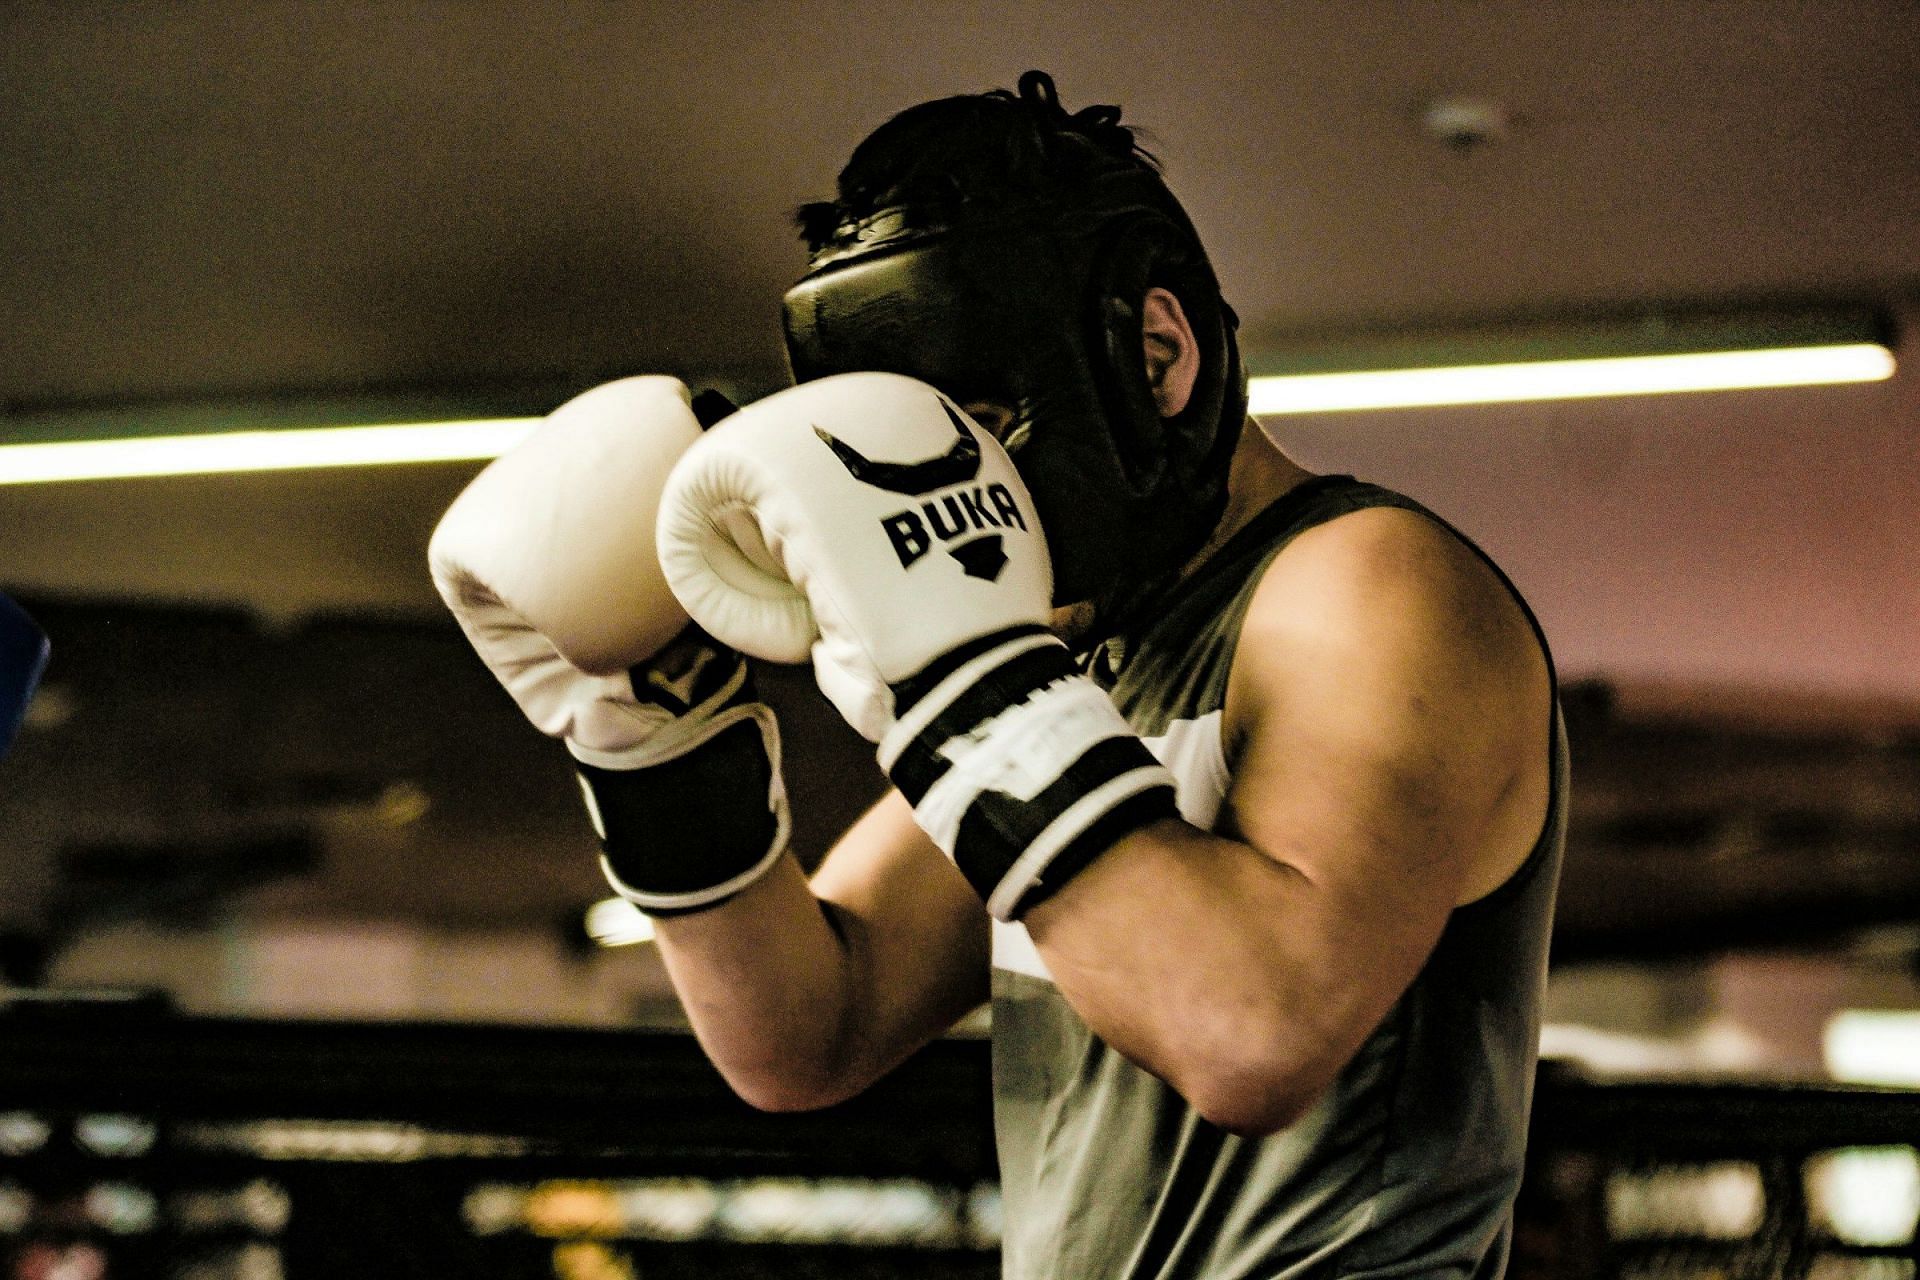 Boxing every day can increase your cardiovascular health (Image by Michael Starkie/Unsplash)